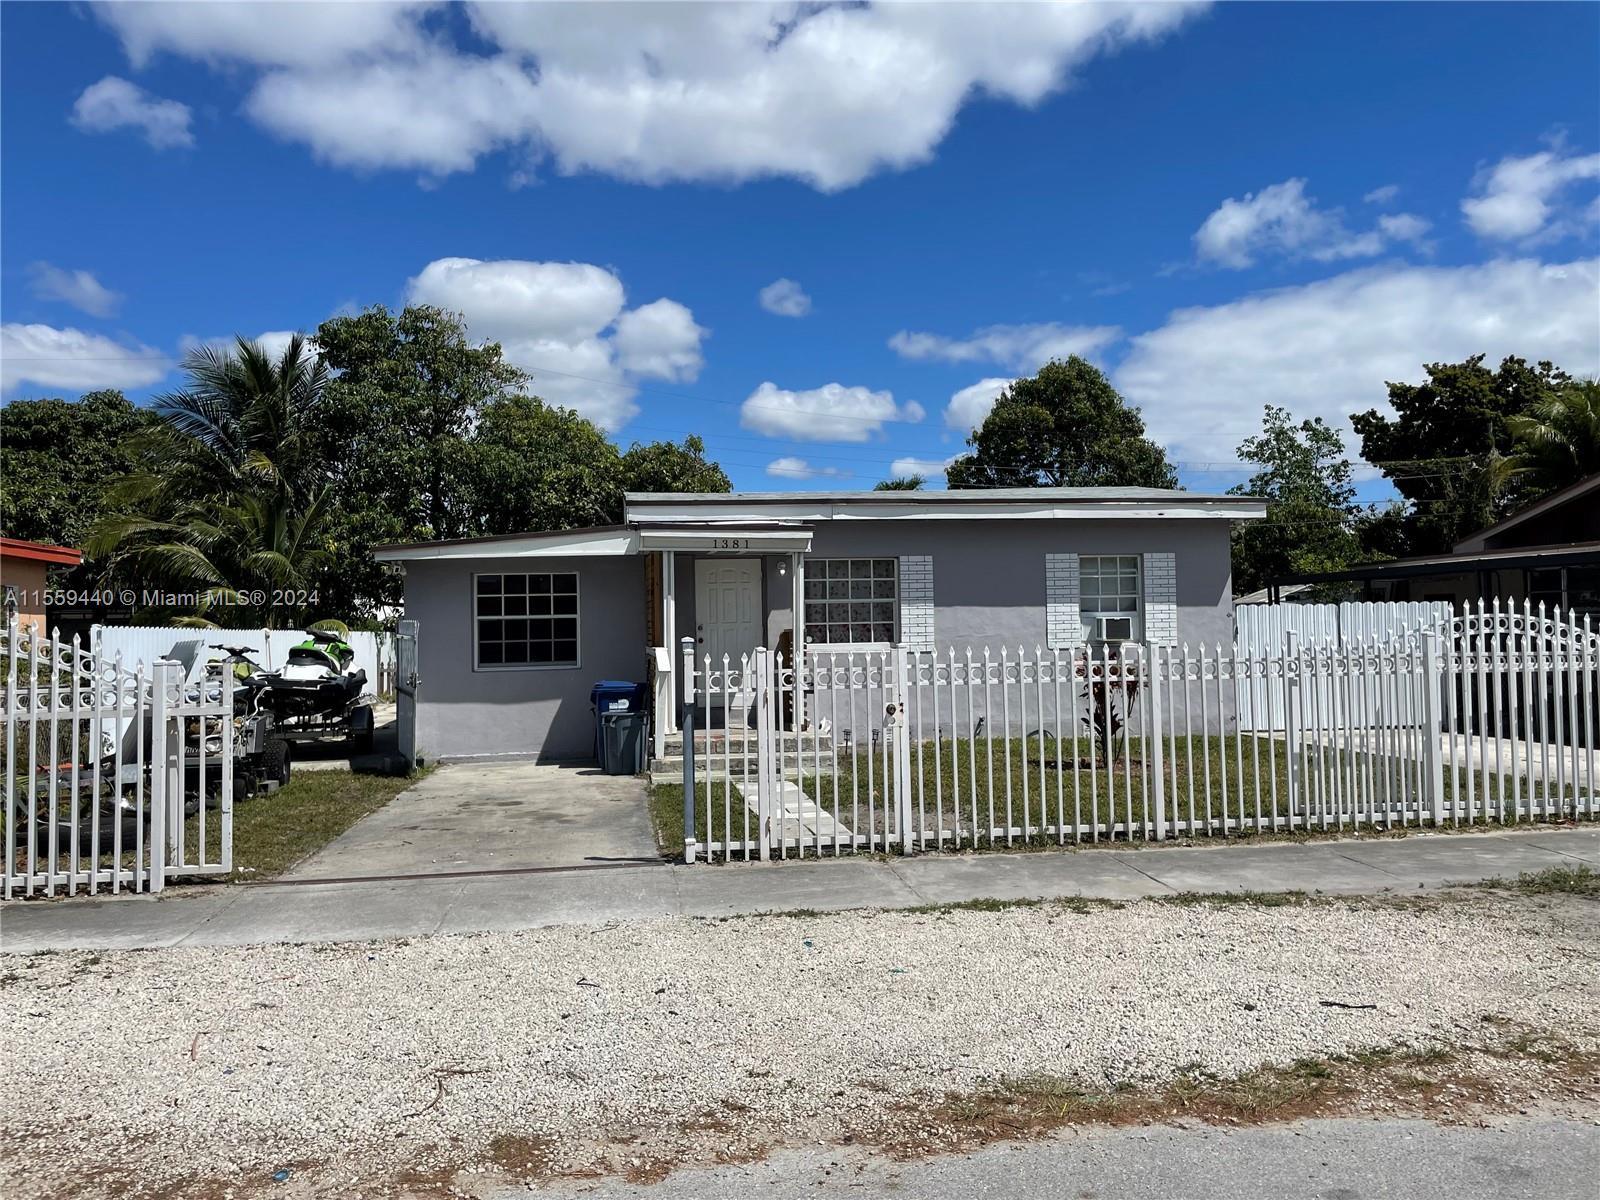 Photo of 1381 NW 116th Ter in Miami, FL